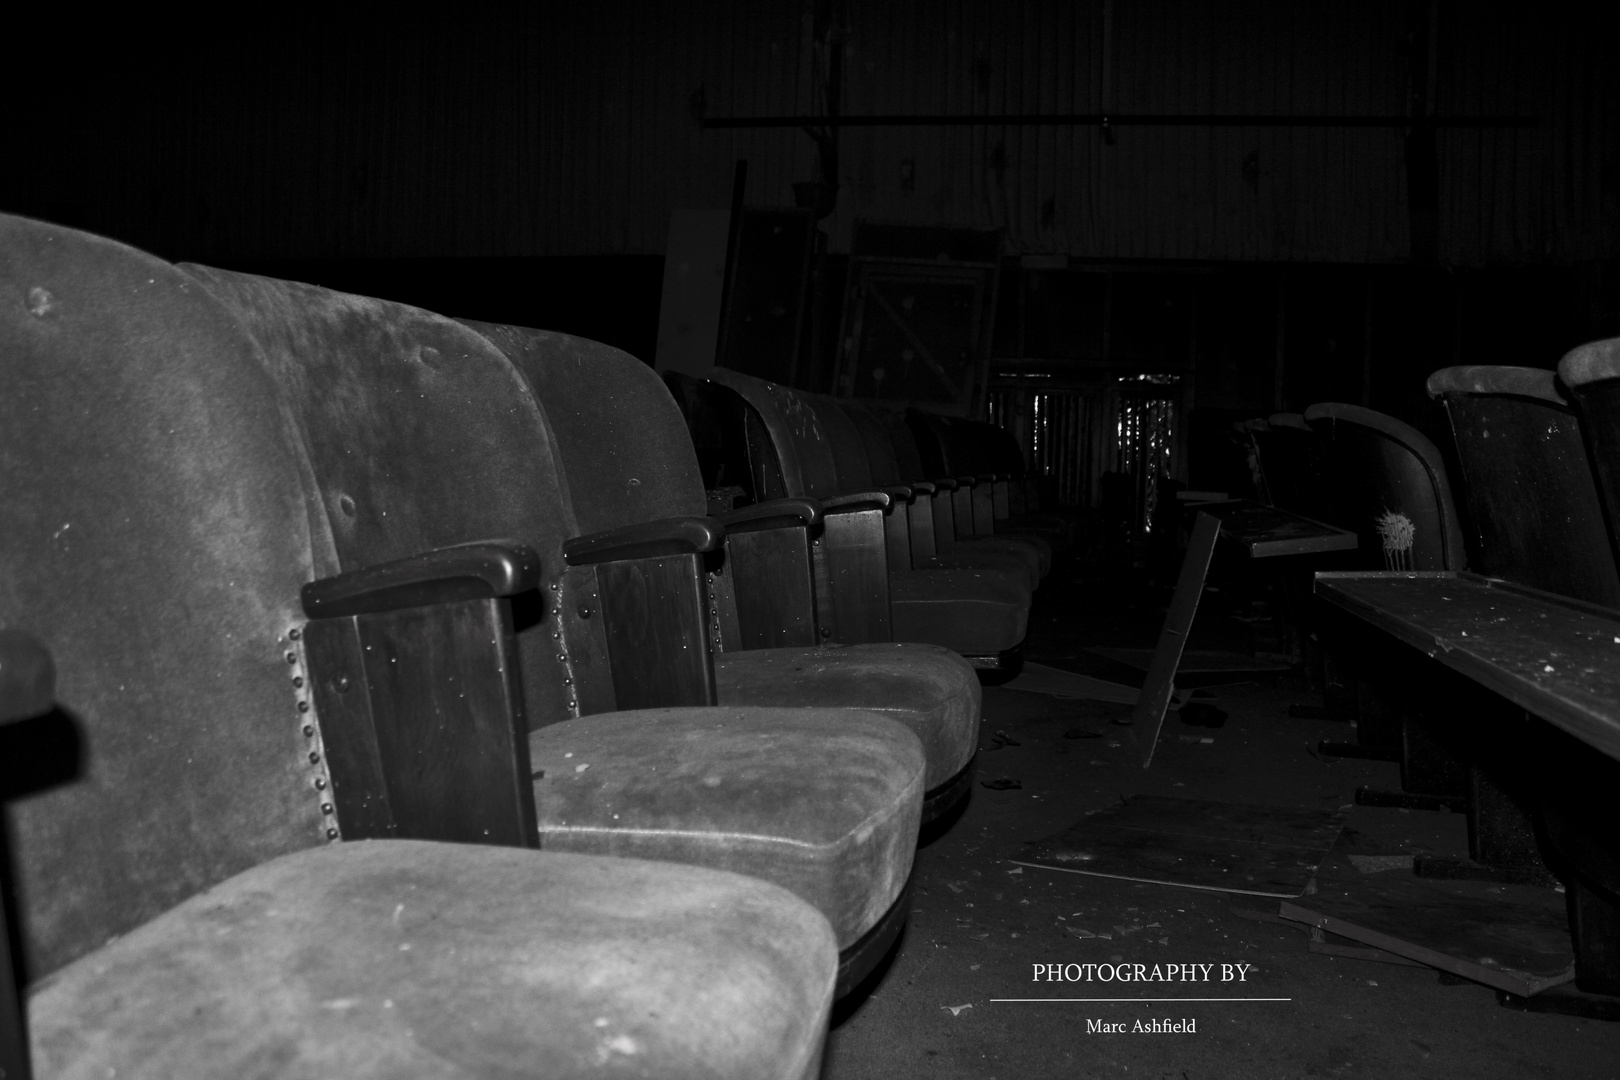 Lost movie theater 9